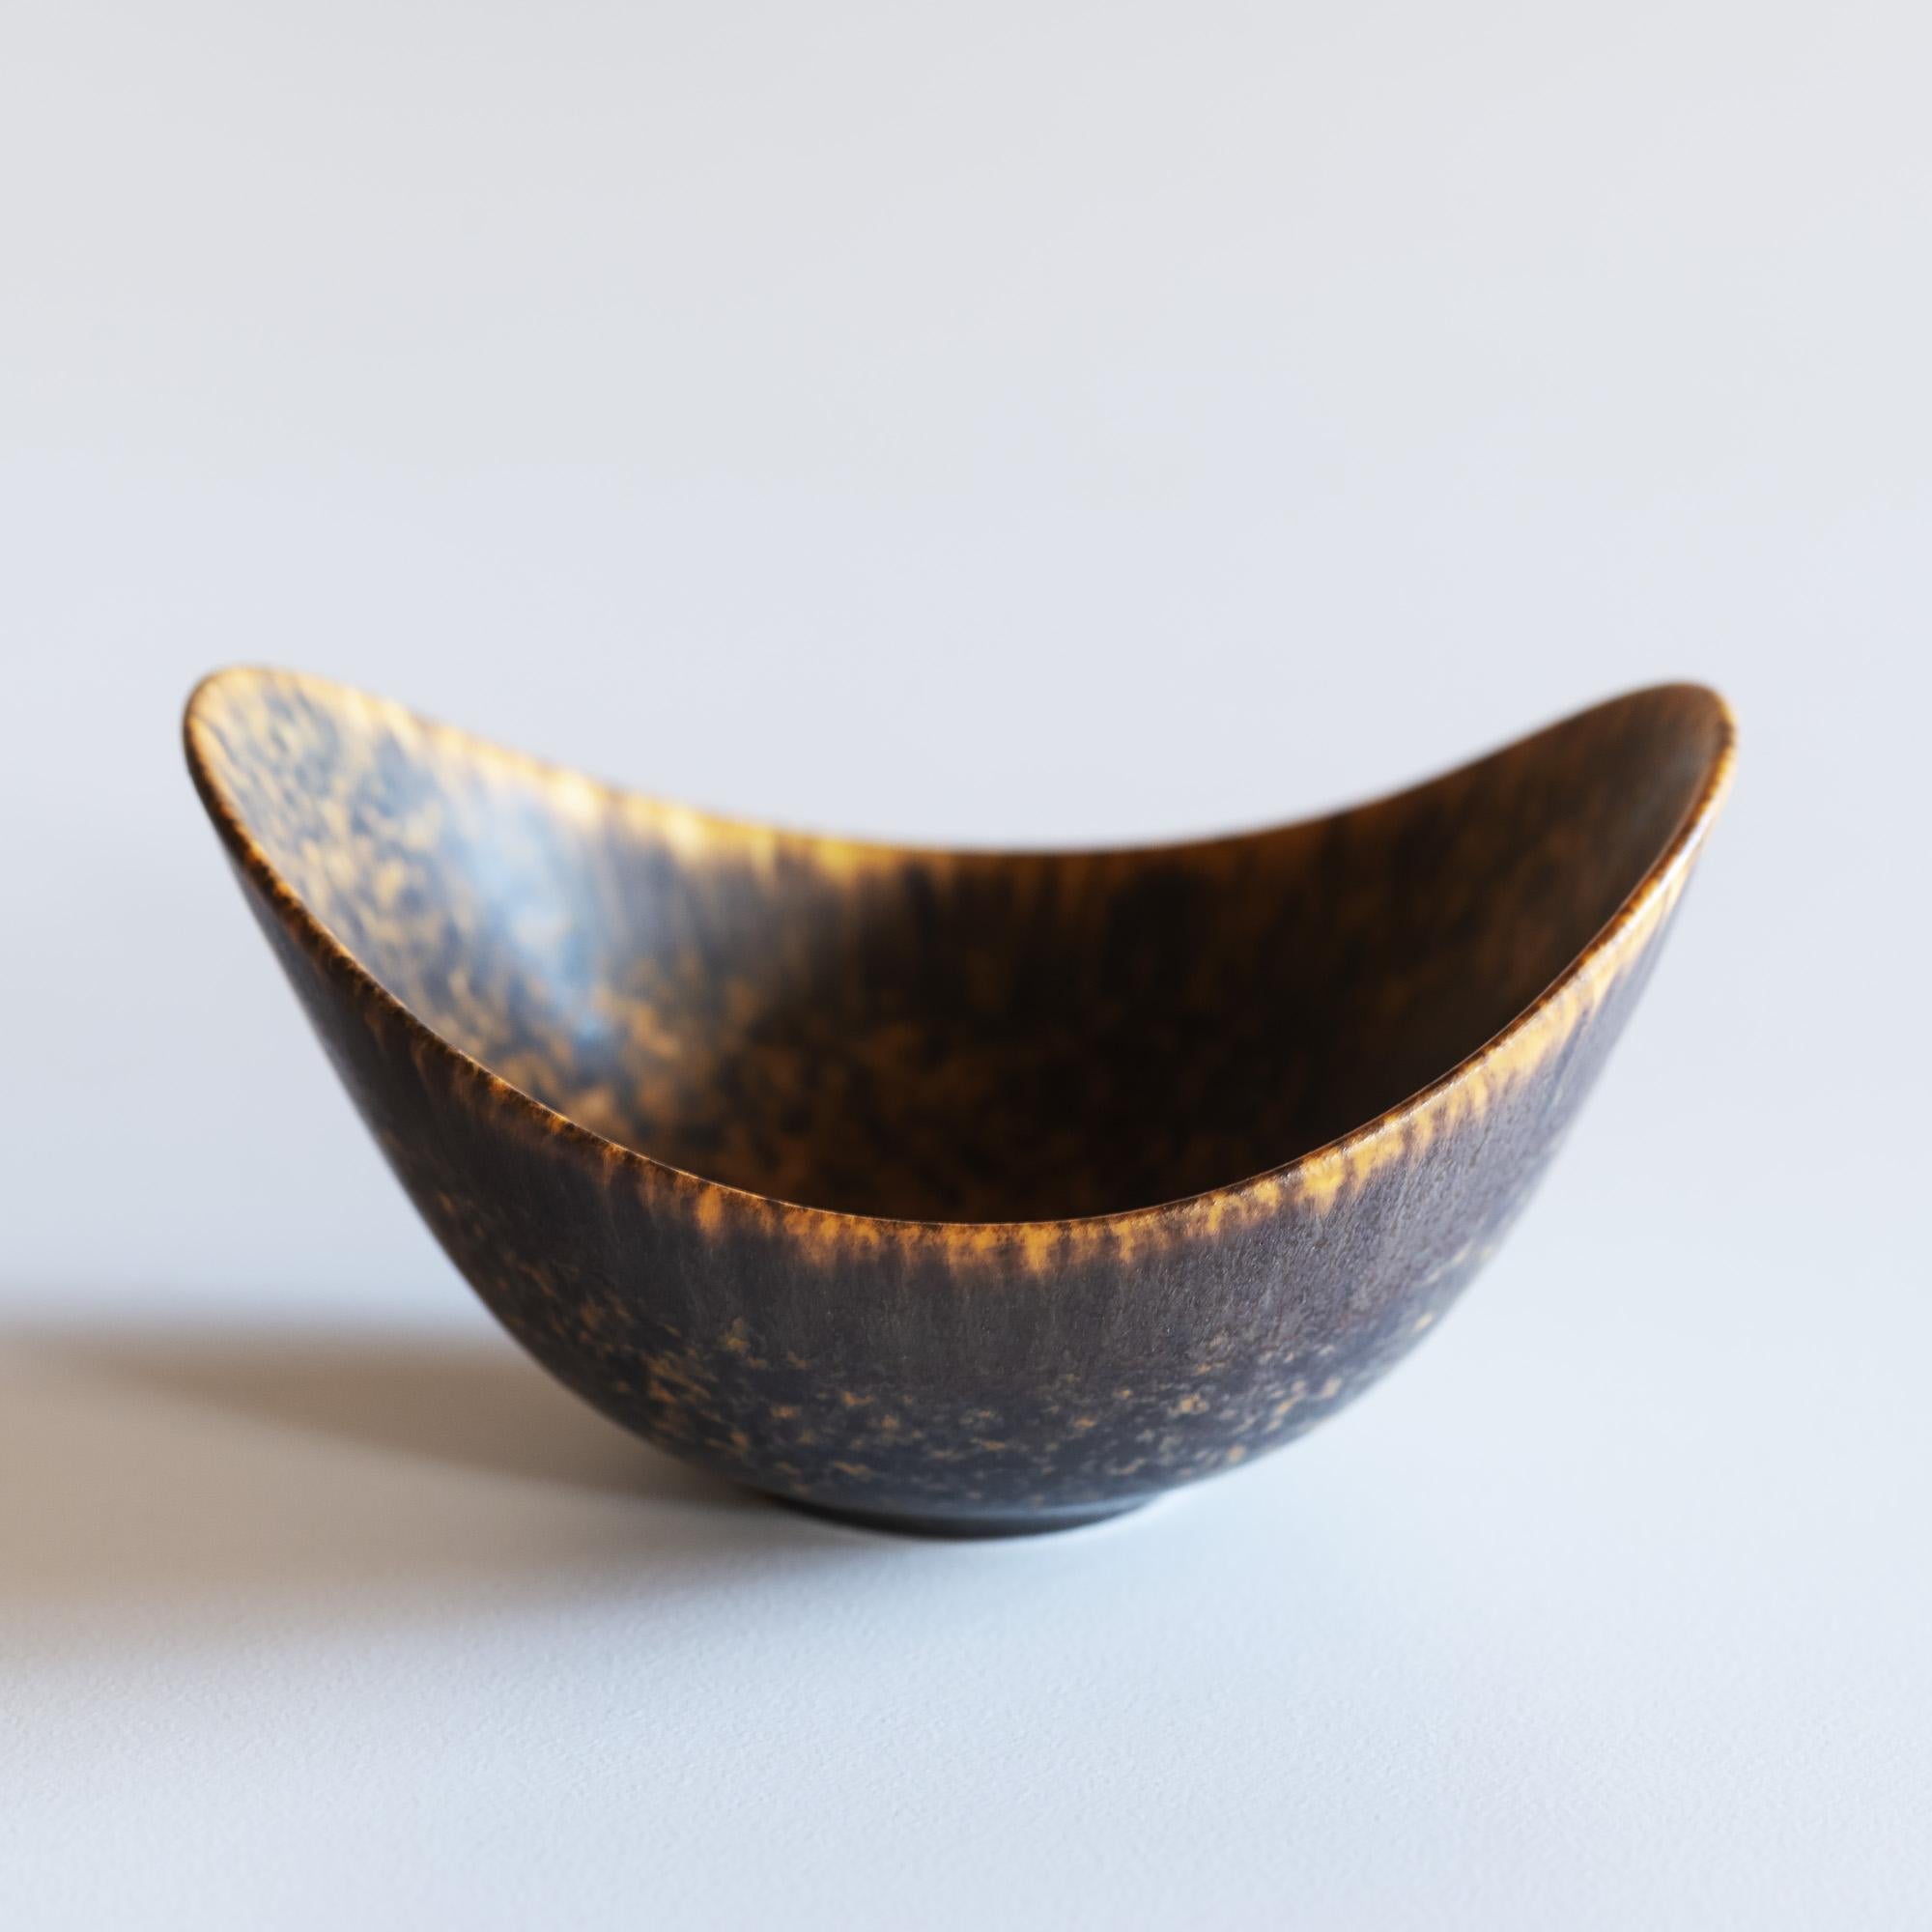 Single Gunnar Nylund stoneware vessel for Rörstrand, Sweden. Matte hares fur glaze in brown and black tones with golden accents.
       